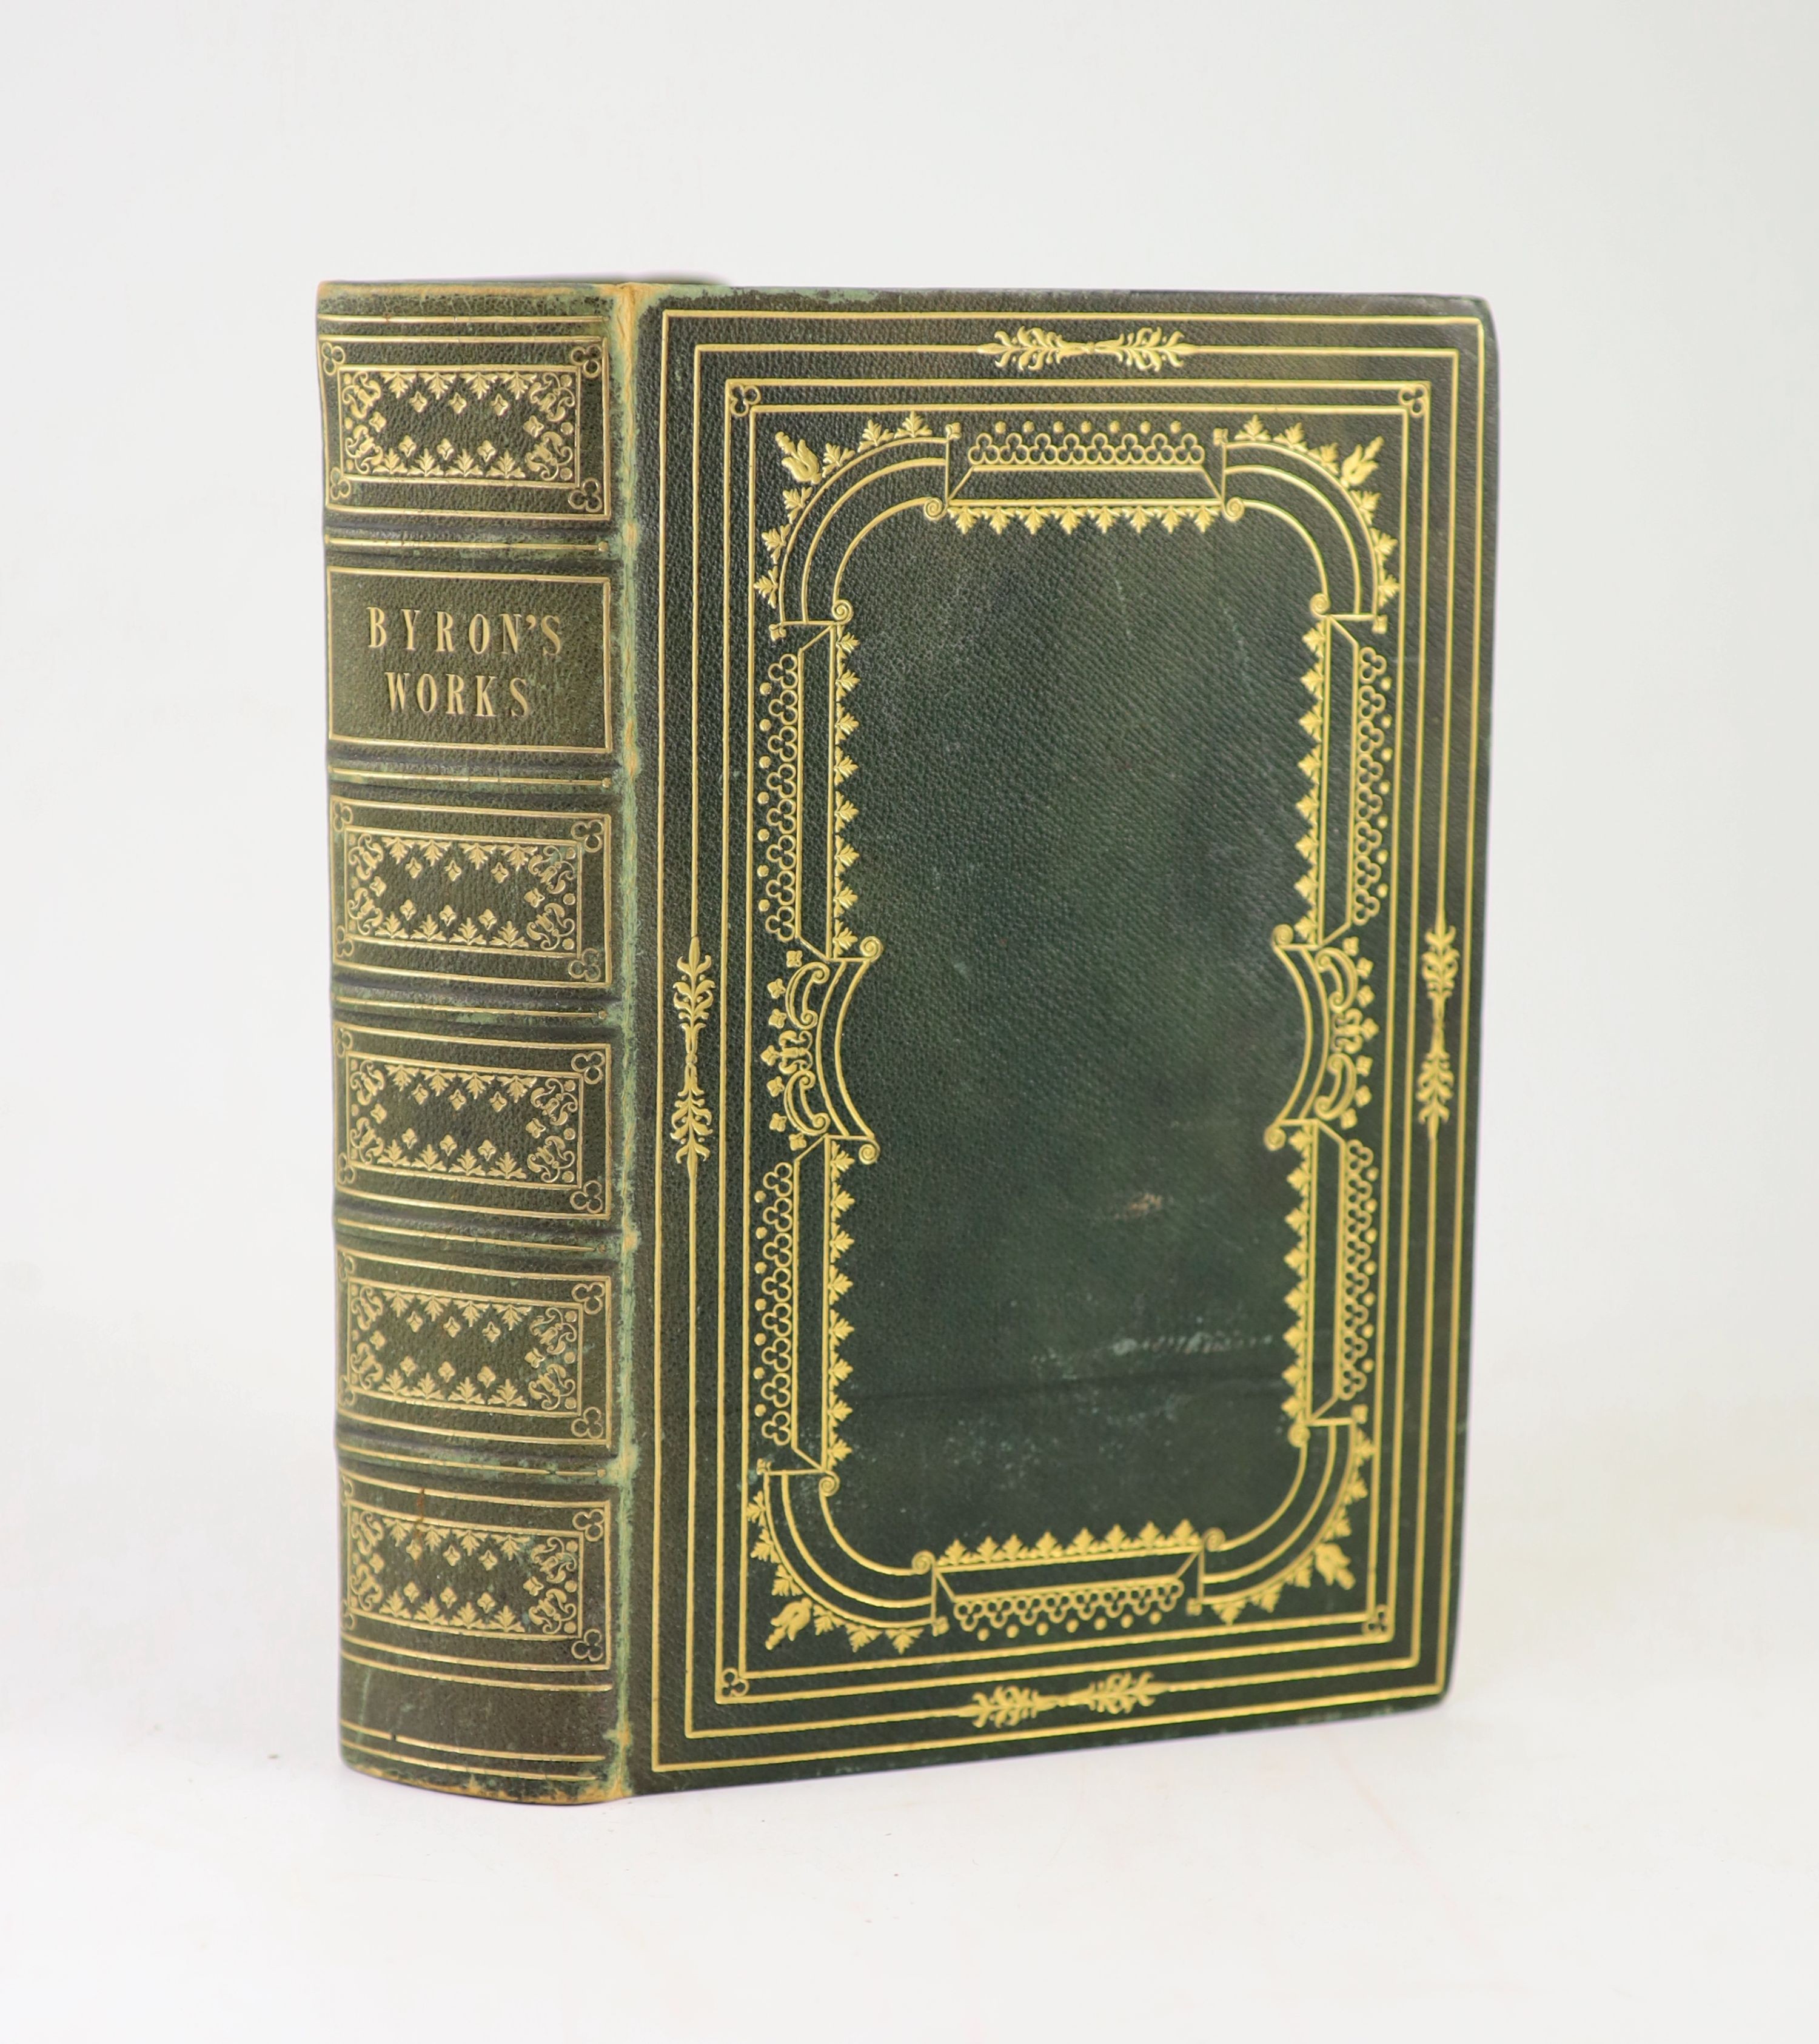 Byron, Lord - The Poetical Works of Lord Byron. Complete in one volume. Engraved frontis, illustrated and printed titles as well as text illustrations. Heavily gilt decorated and panelled morocco covers and spine with le